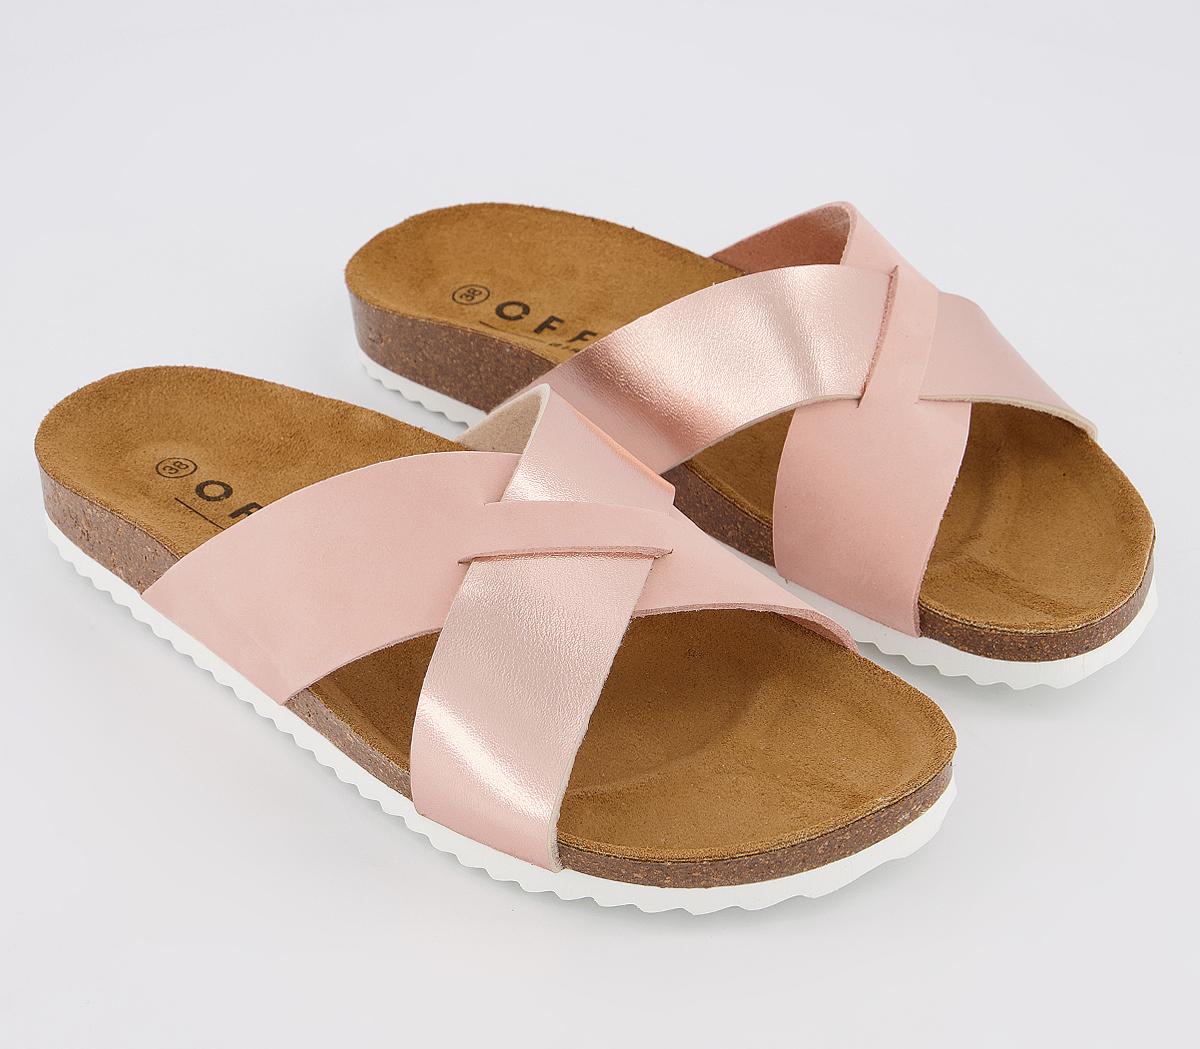 OFFICE Soho Cross Strap Sandals Nude Suede Rose Gold Mix - Women’s Sandals